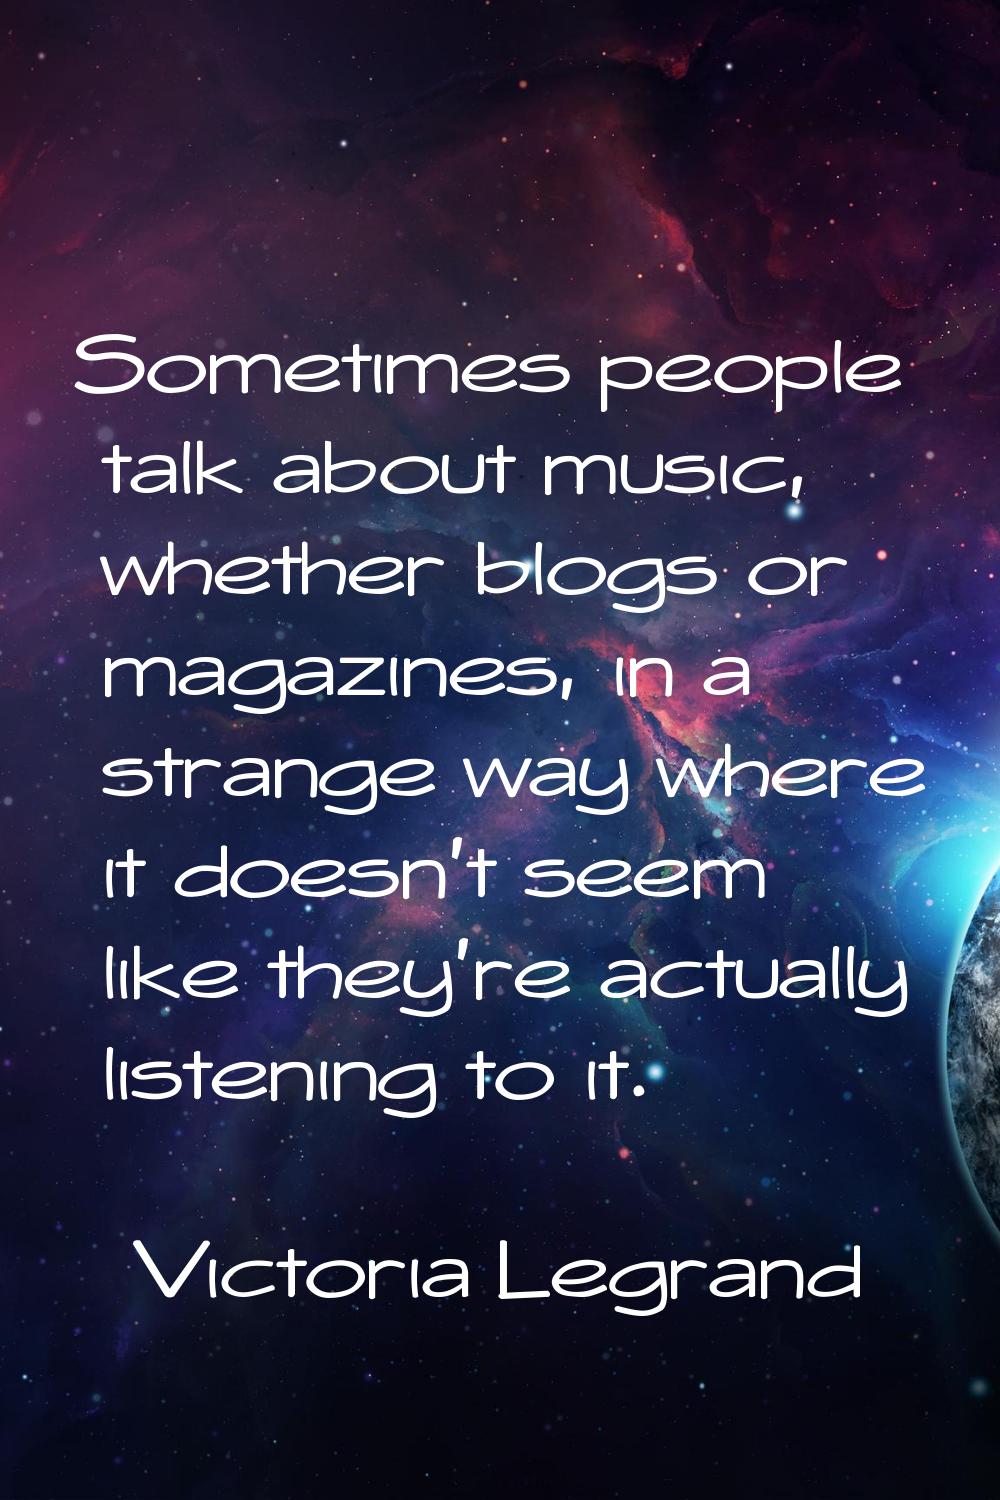 Sometimes people talk about music, whether blogs or magazines, in a strange way where it doesn't se